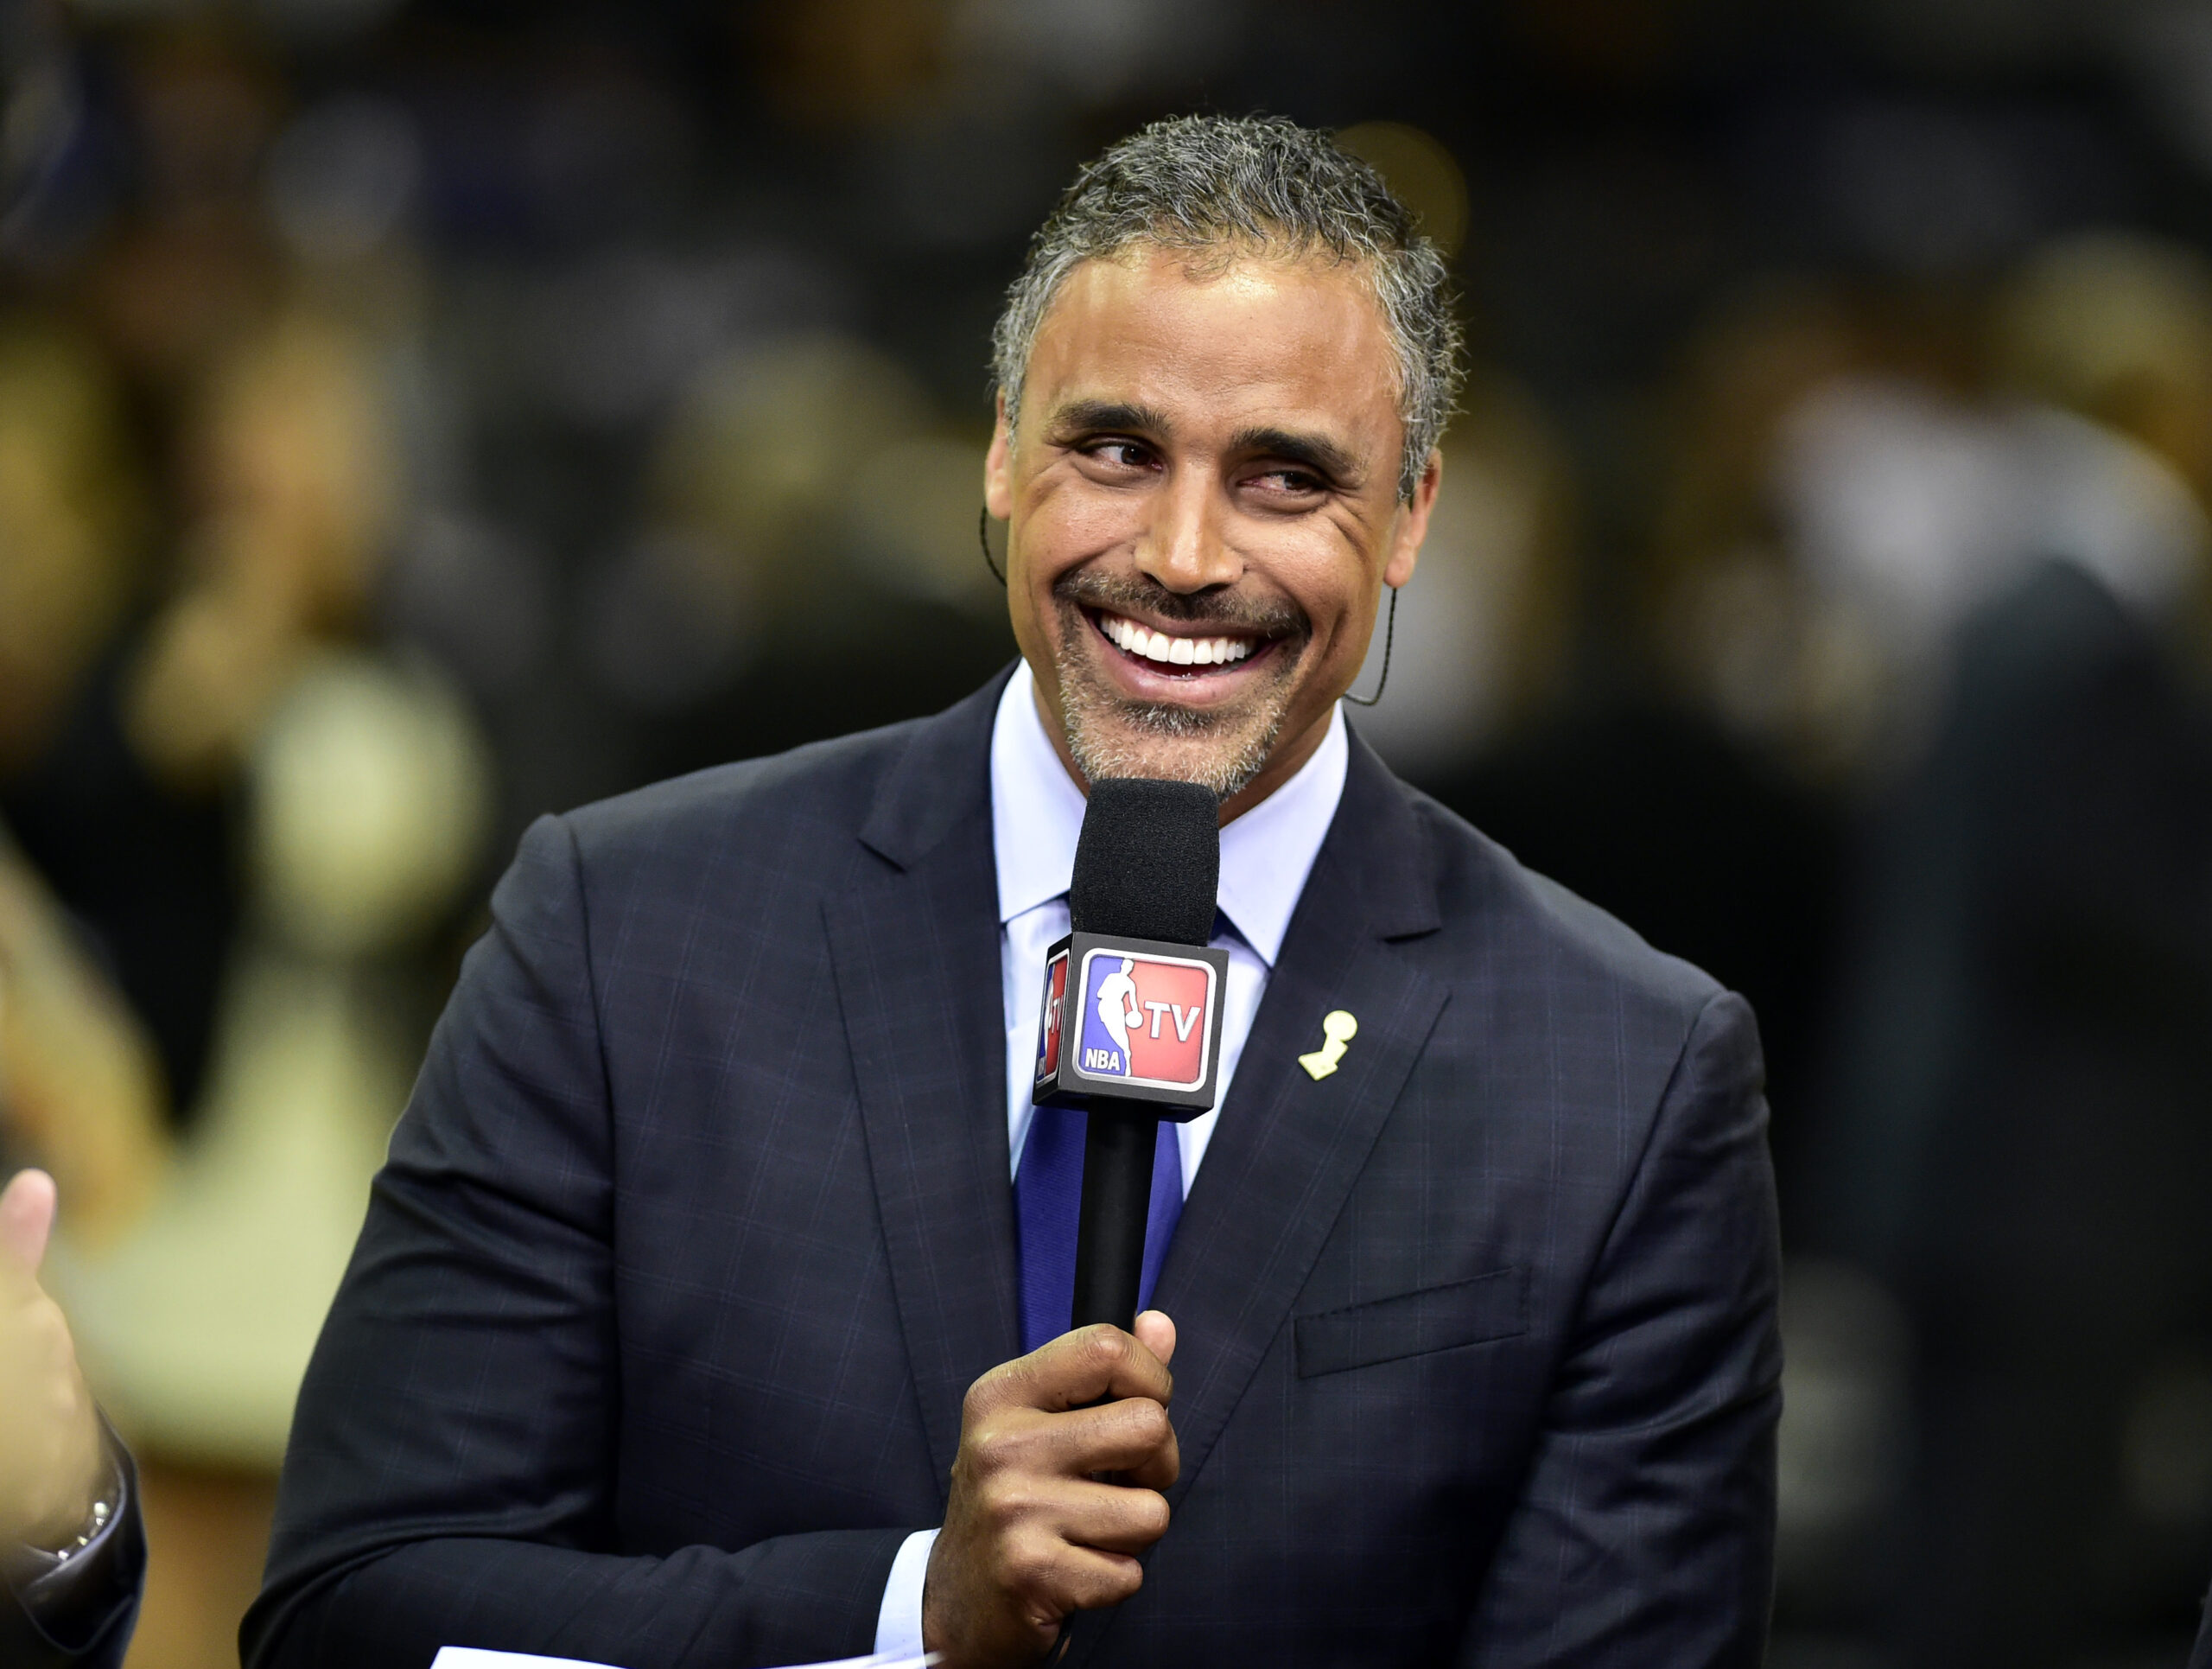 Former Laker Rick Fox goes at Nets’ Spencer Dinwiddie for ‘blessed’ comments